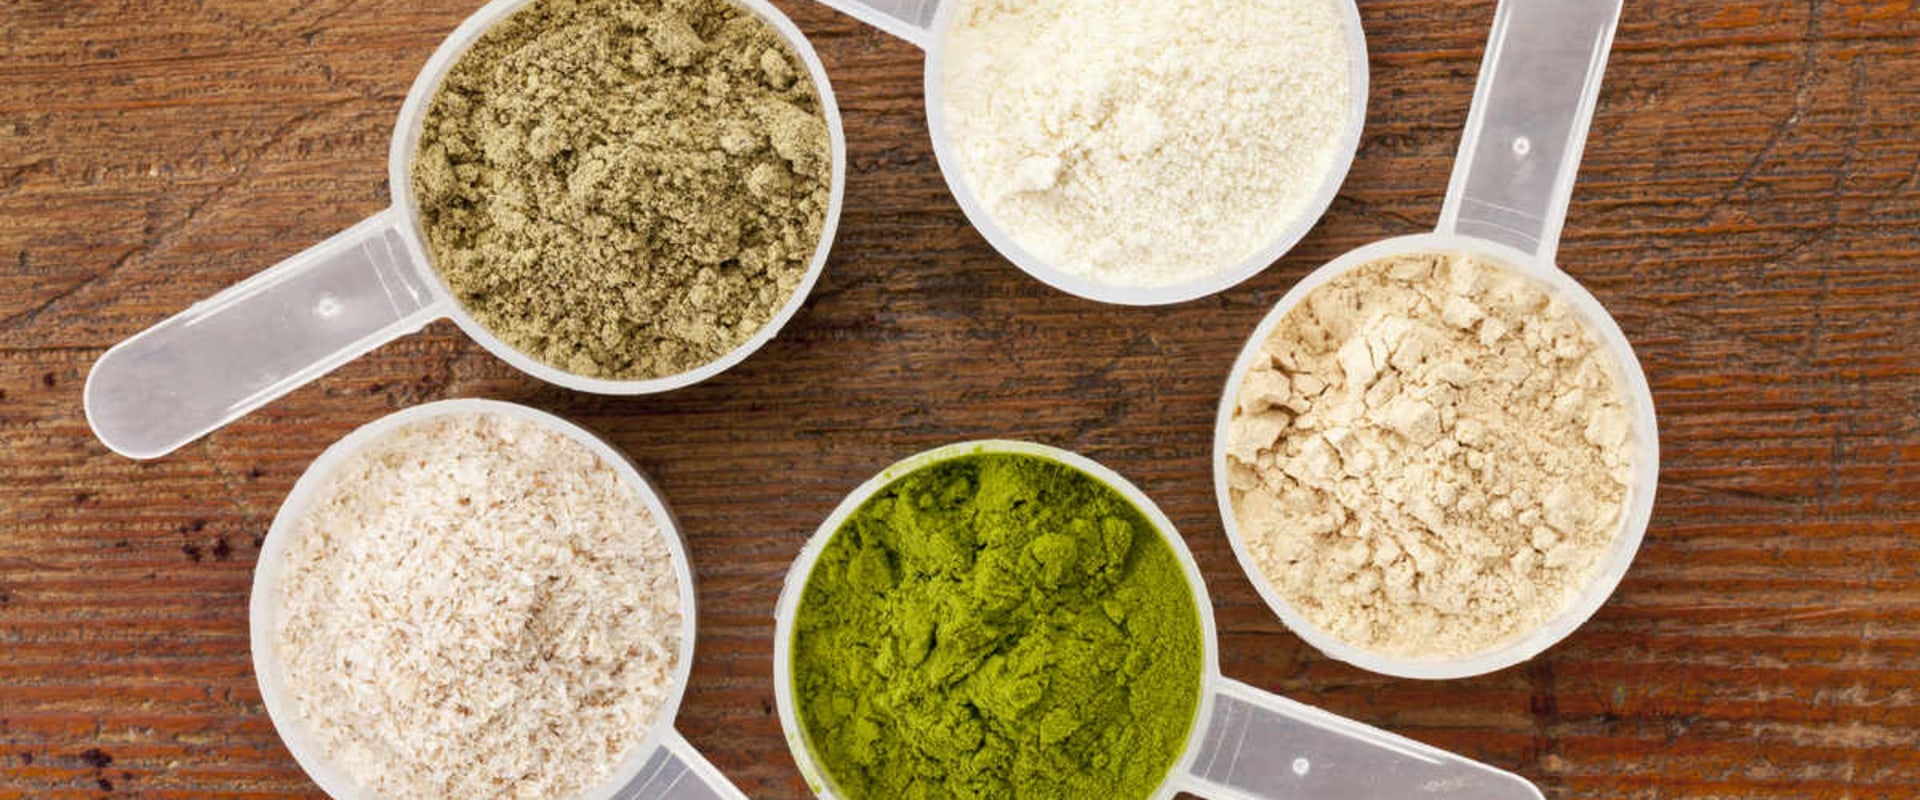 Is plant-based protein better than whey pros and cons?